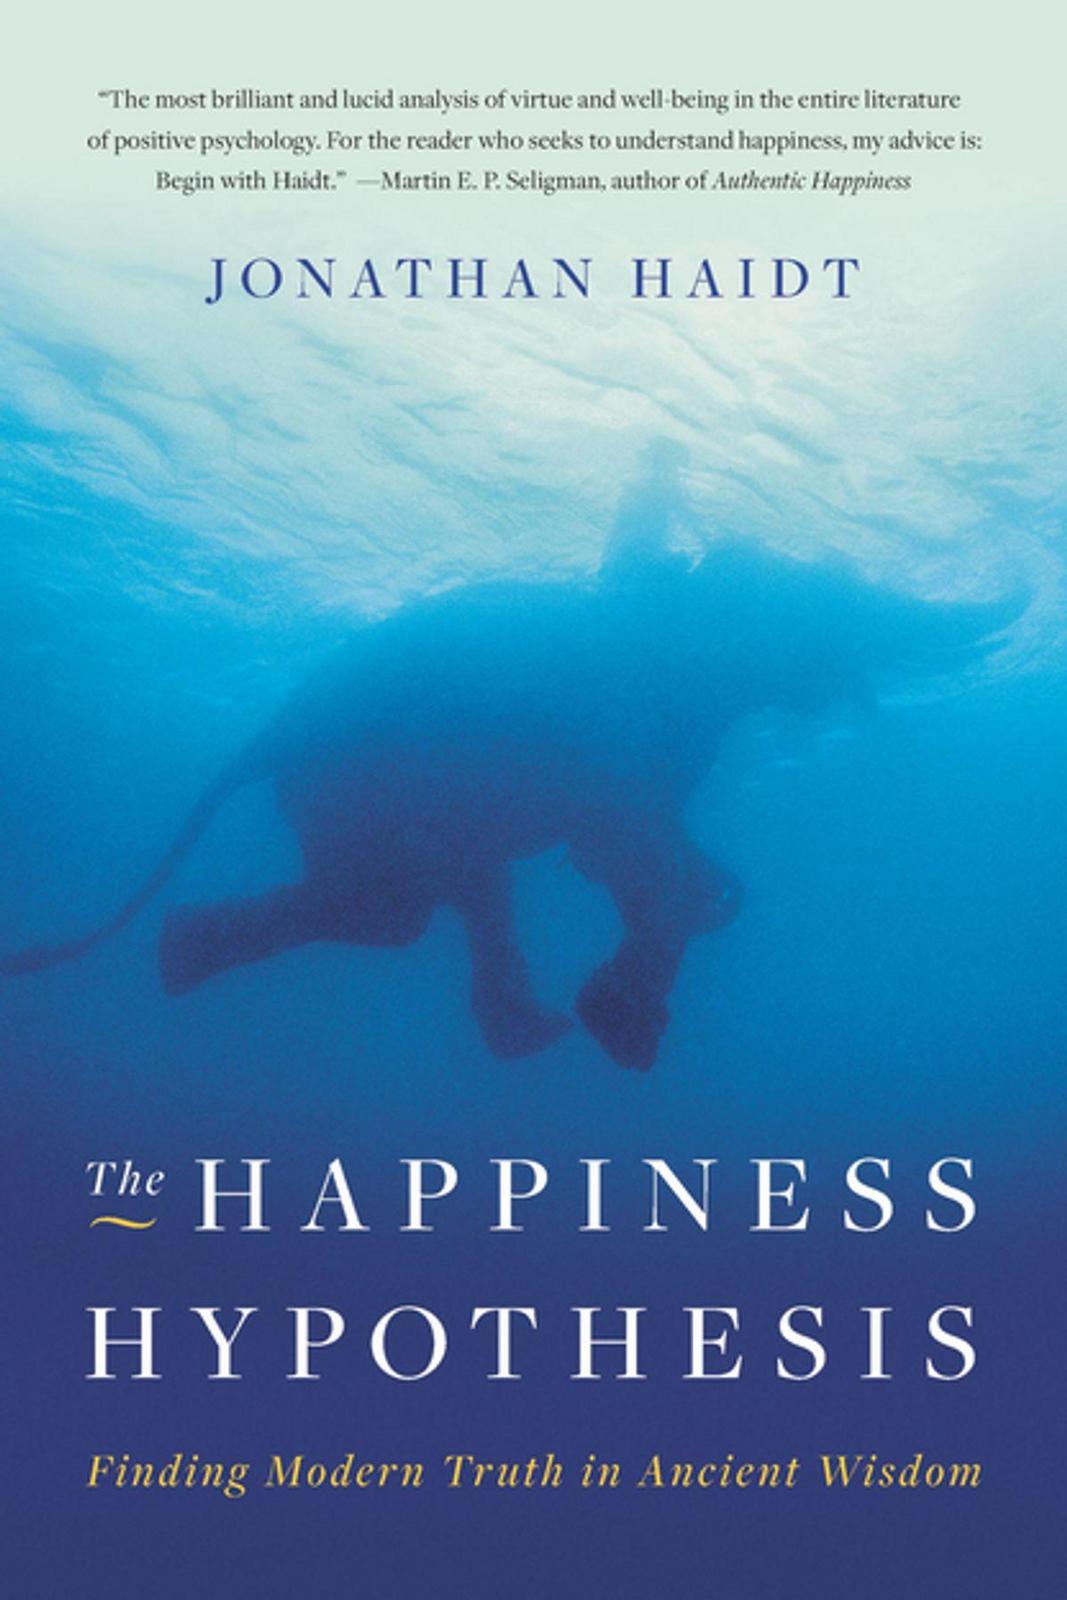 Jonathan Haidt: The Happiness Hypothesis (2006)